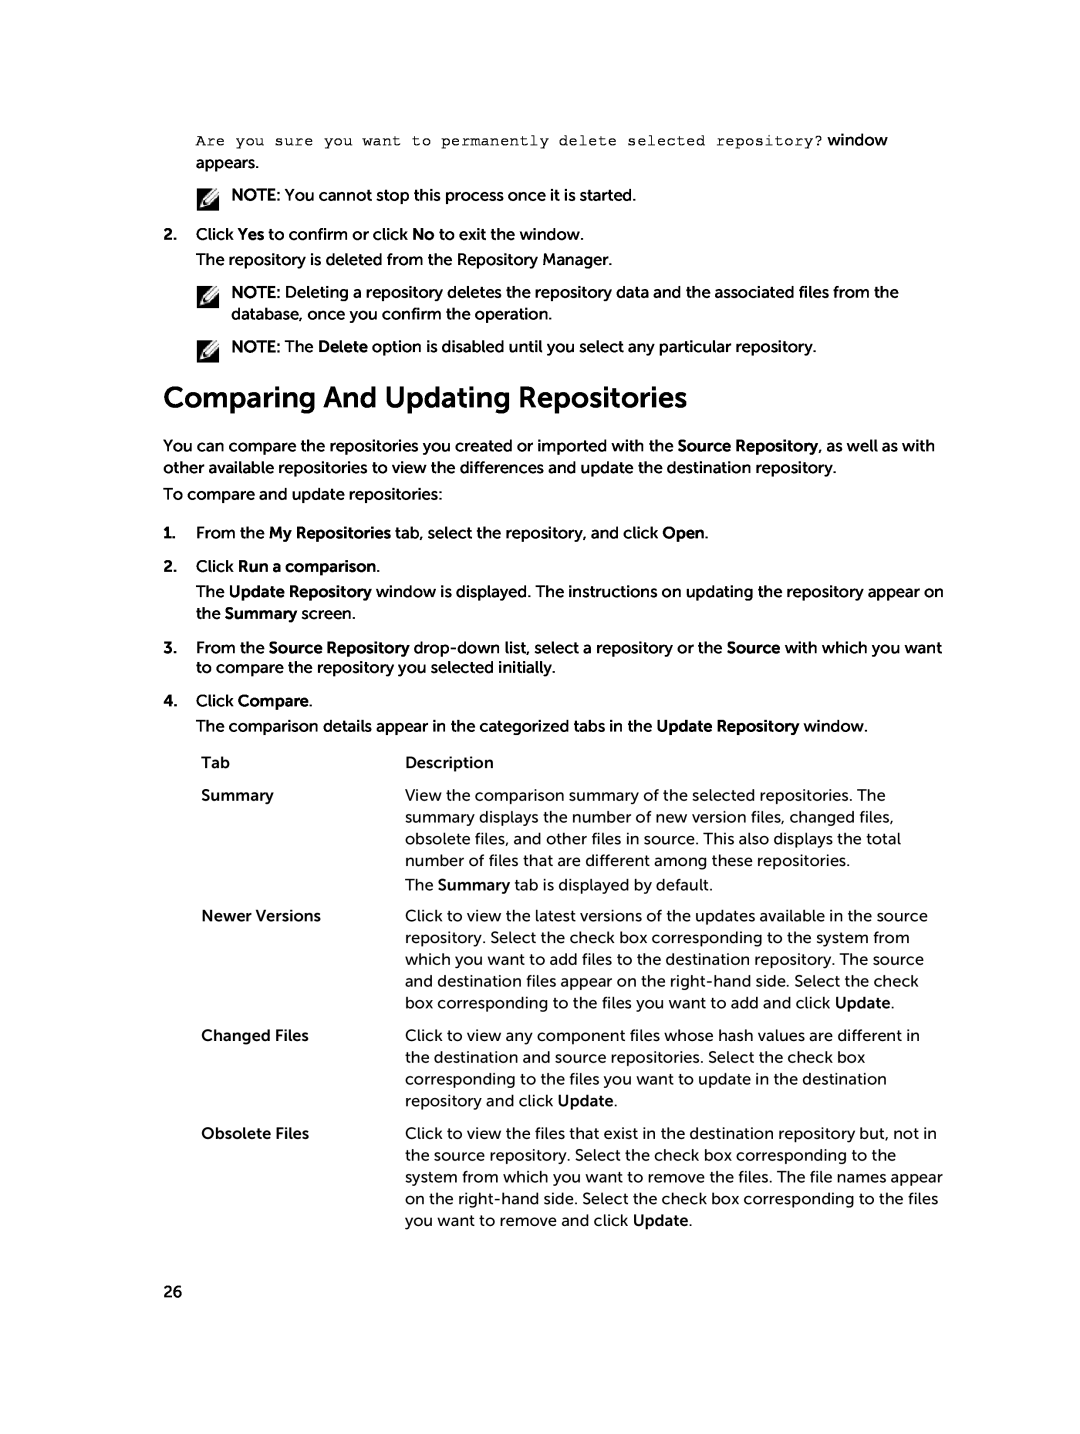 Dell 1.8 manual Comparing And Updating Repositories 